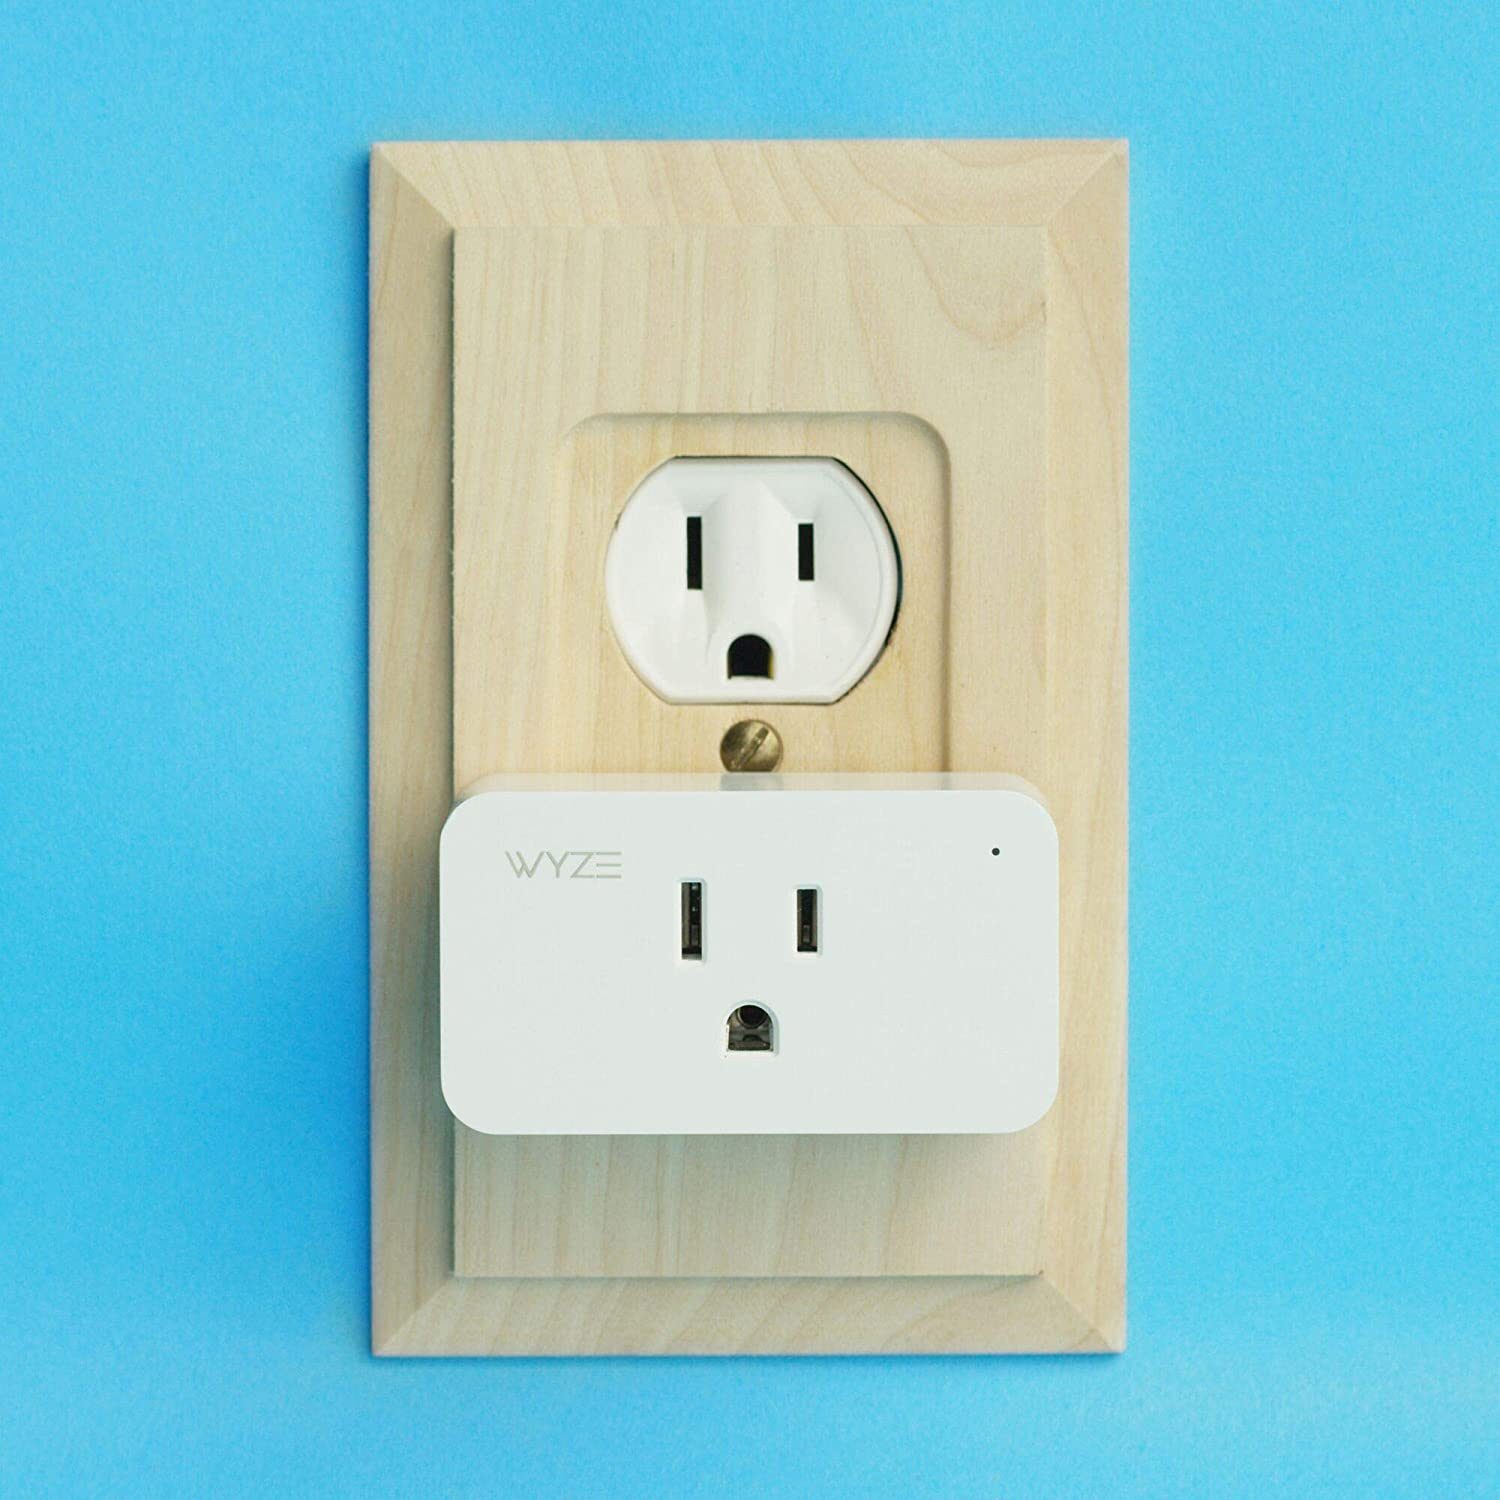 Ways smart plugs can save you energy costs